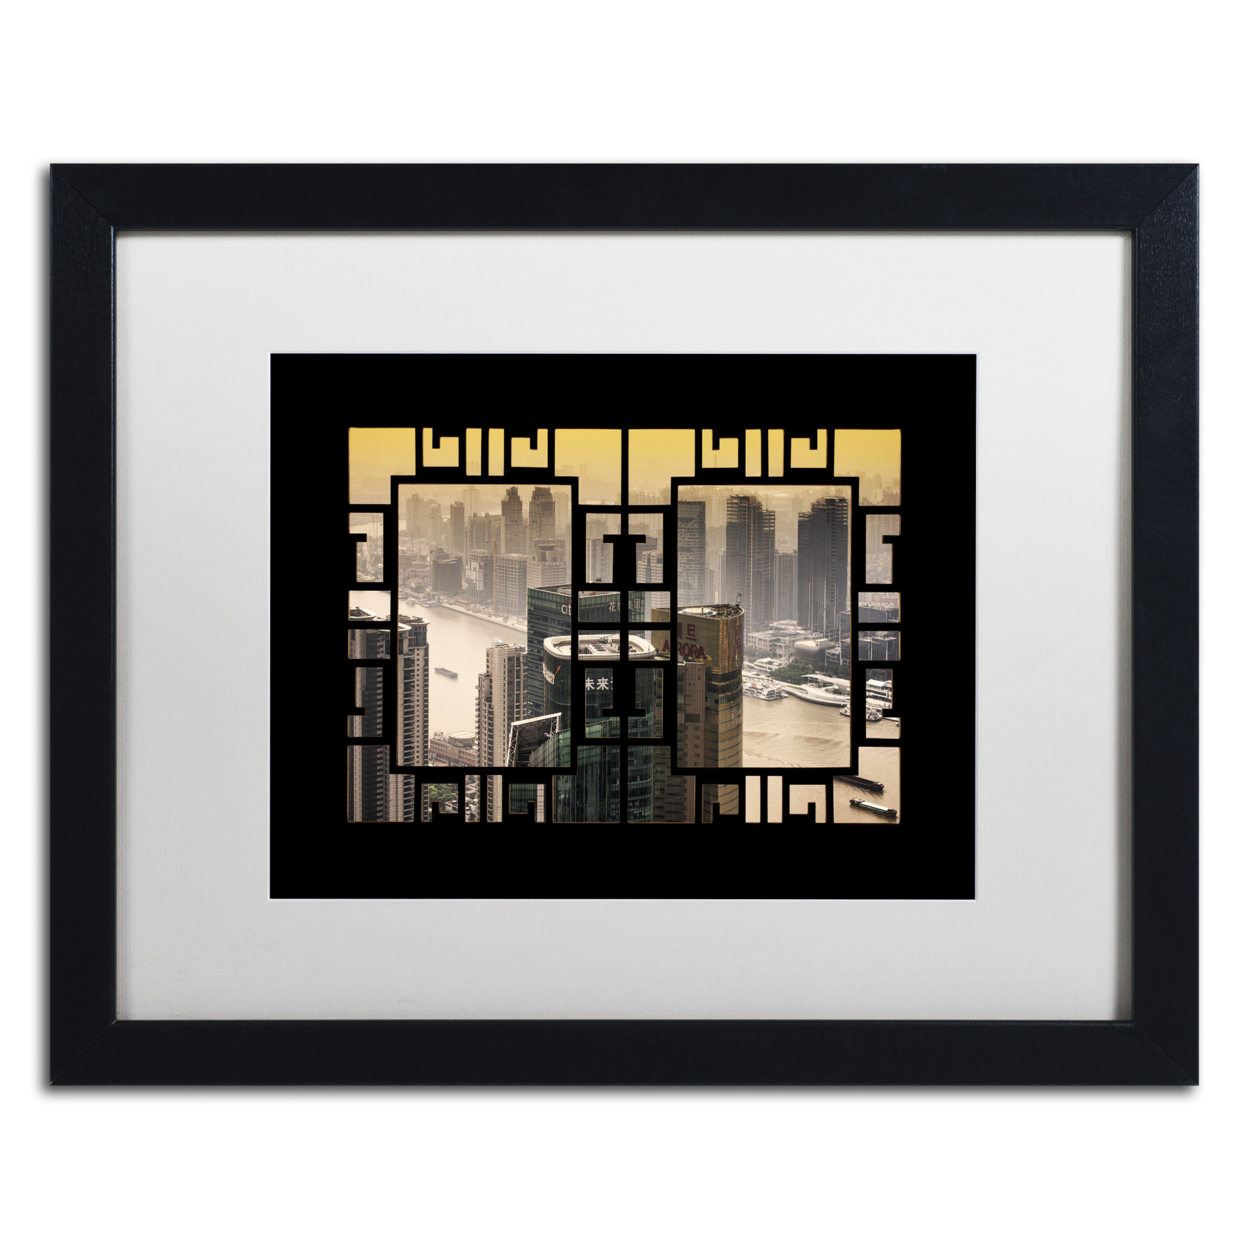 Philippe Hugonnard 'The City' Black Wooden Framed Art 18 X 22 Inches